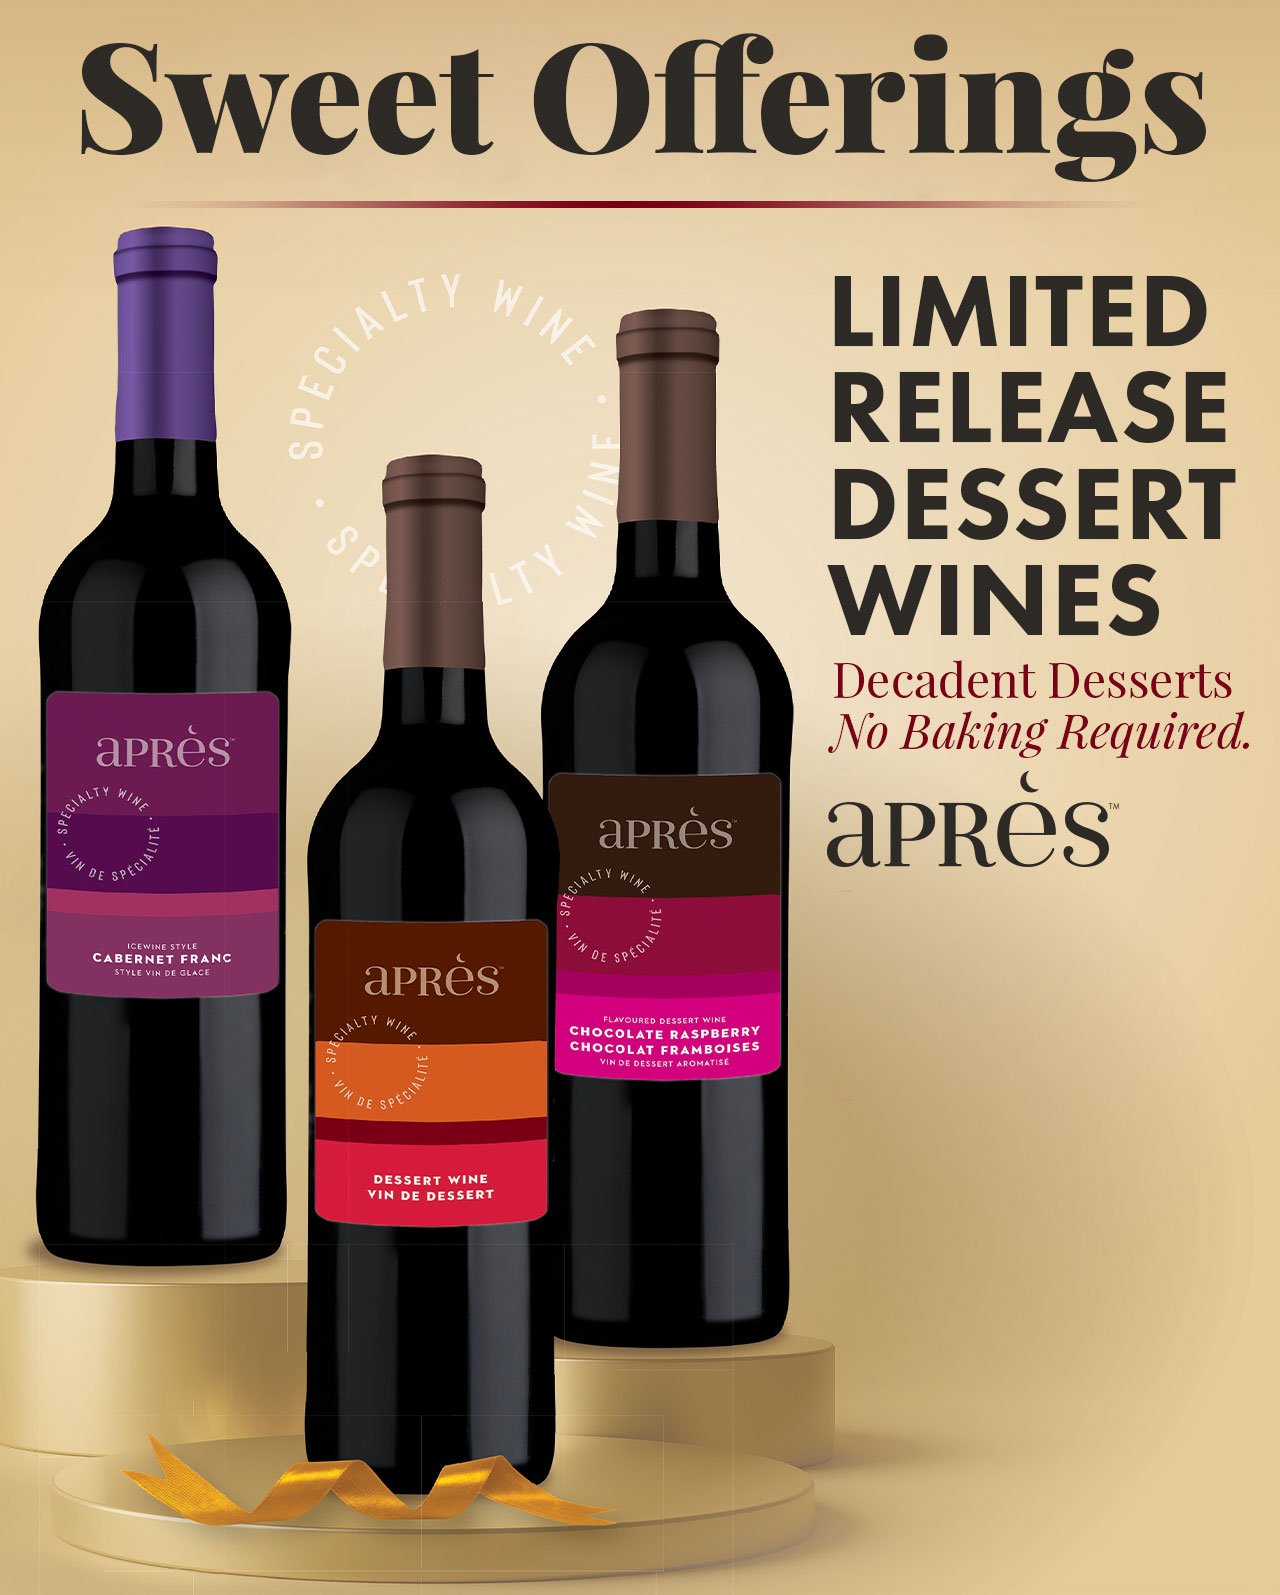 Sweet Offerings Apres Limited Release Dessert Wines. Decadent Desserts. No Baking Requird.Order Now >